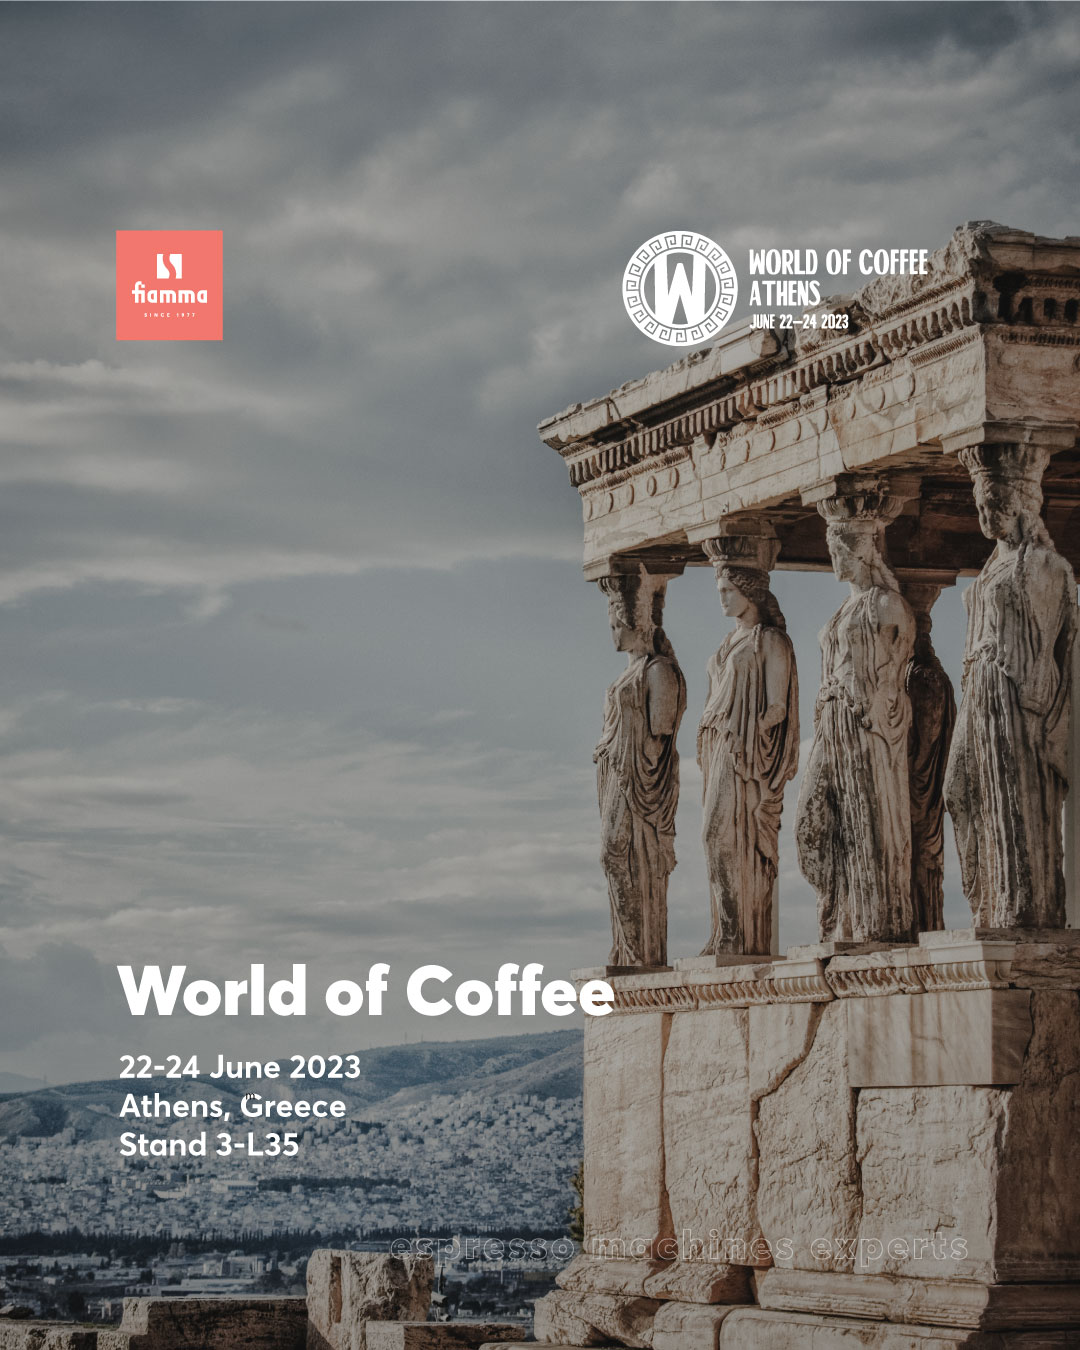 Fiamma at World of Coffee 2023 in Athens